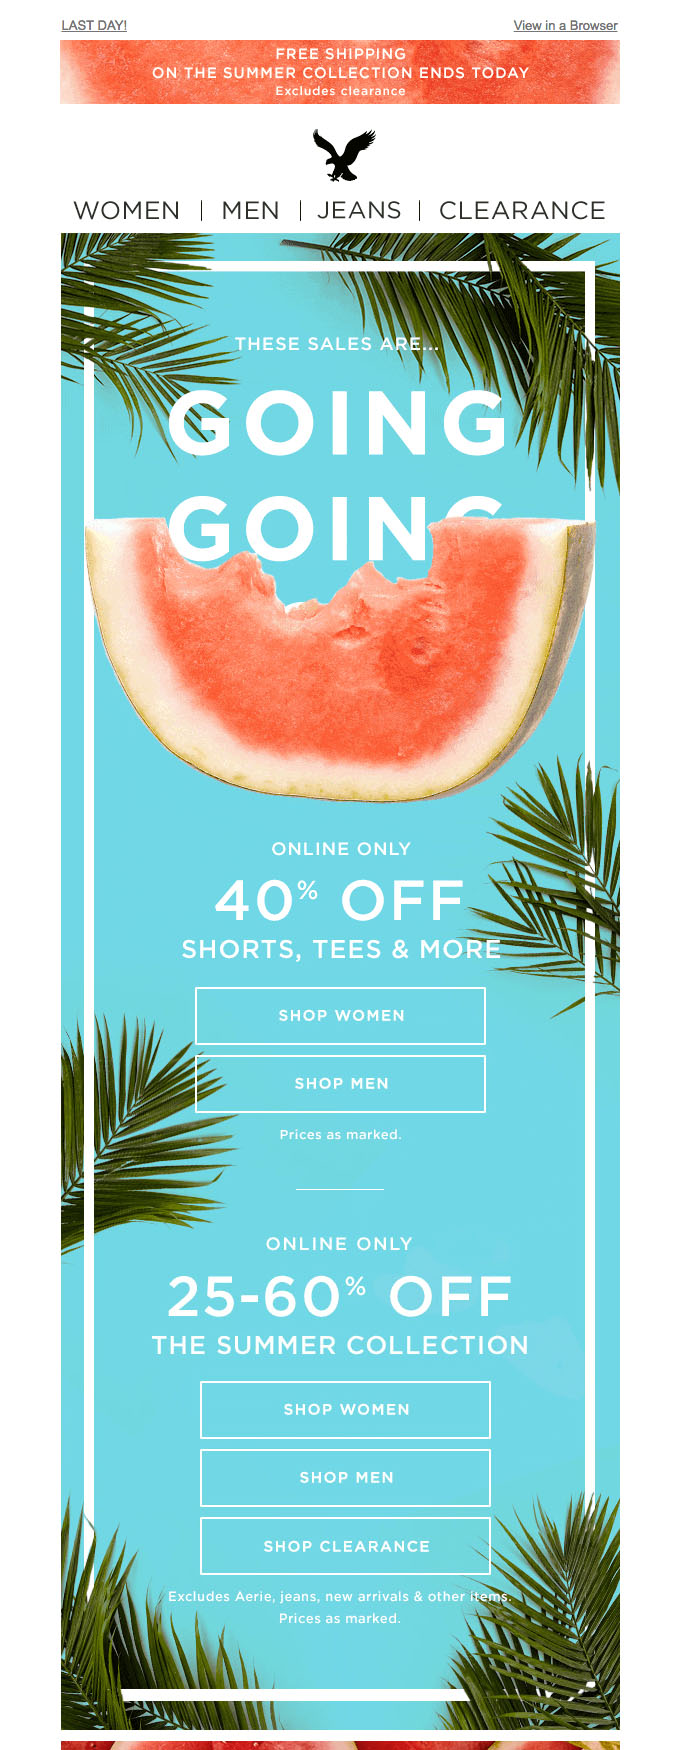 Promotional Emails - Sales Email Example - American Eagle